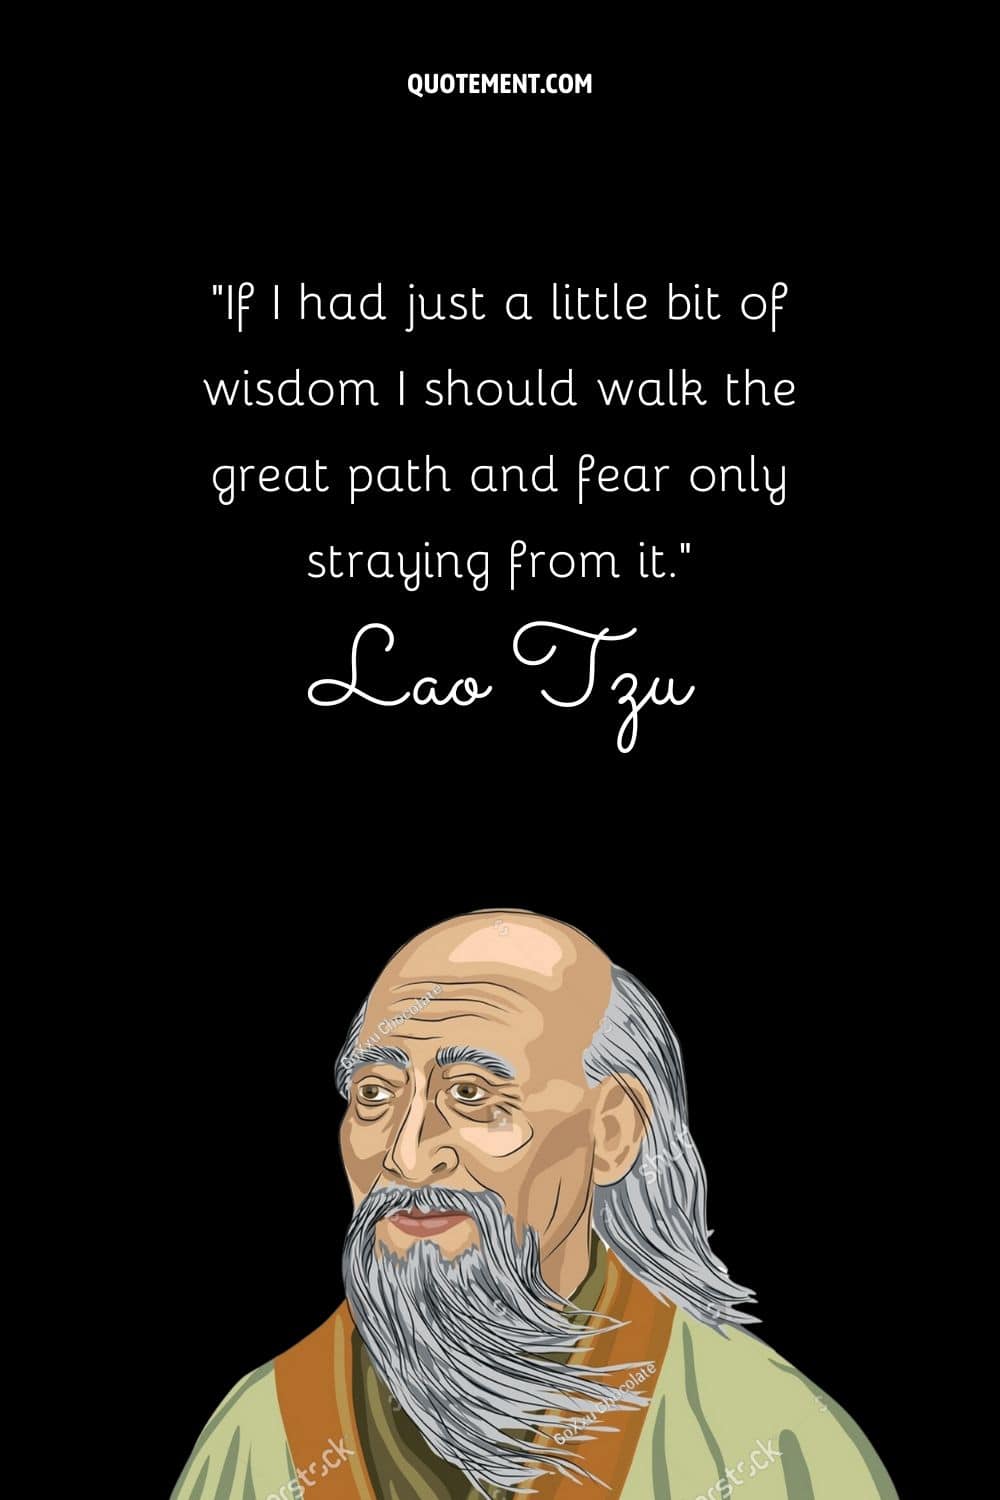 If I had just a little bit of wisdom I should walk the great path and fear only straying from it.